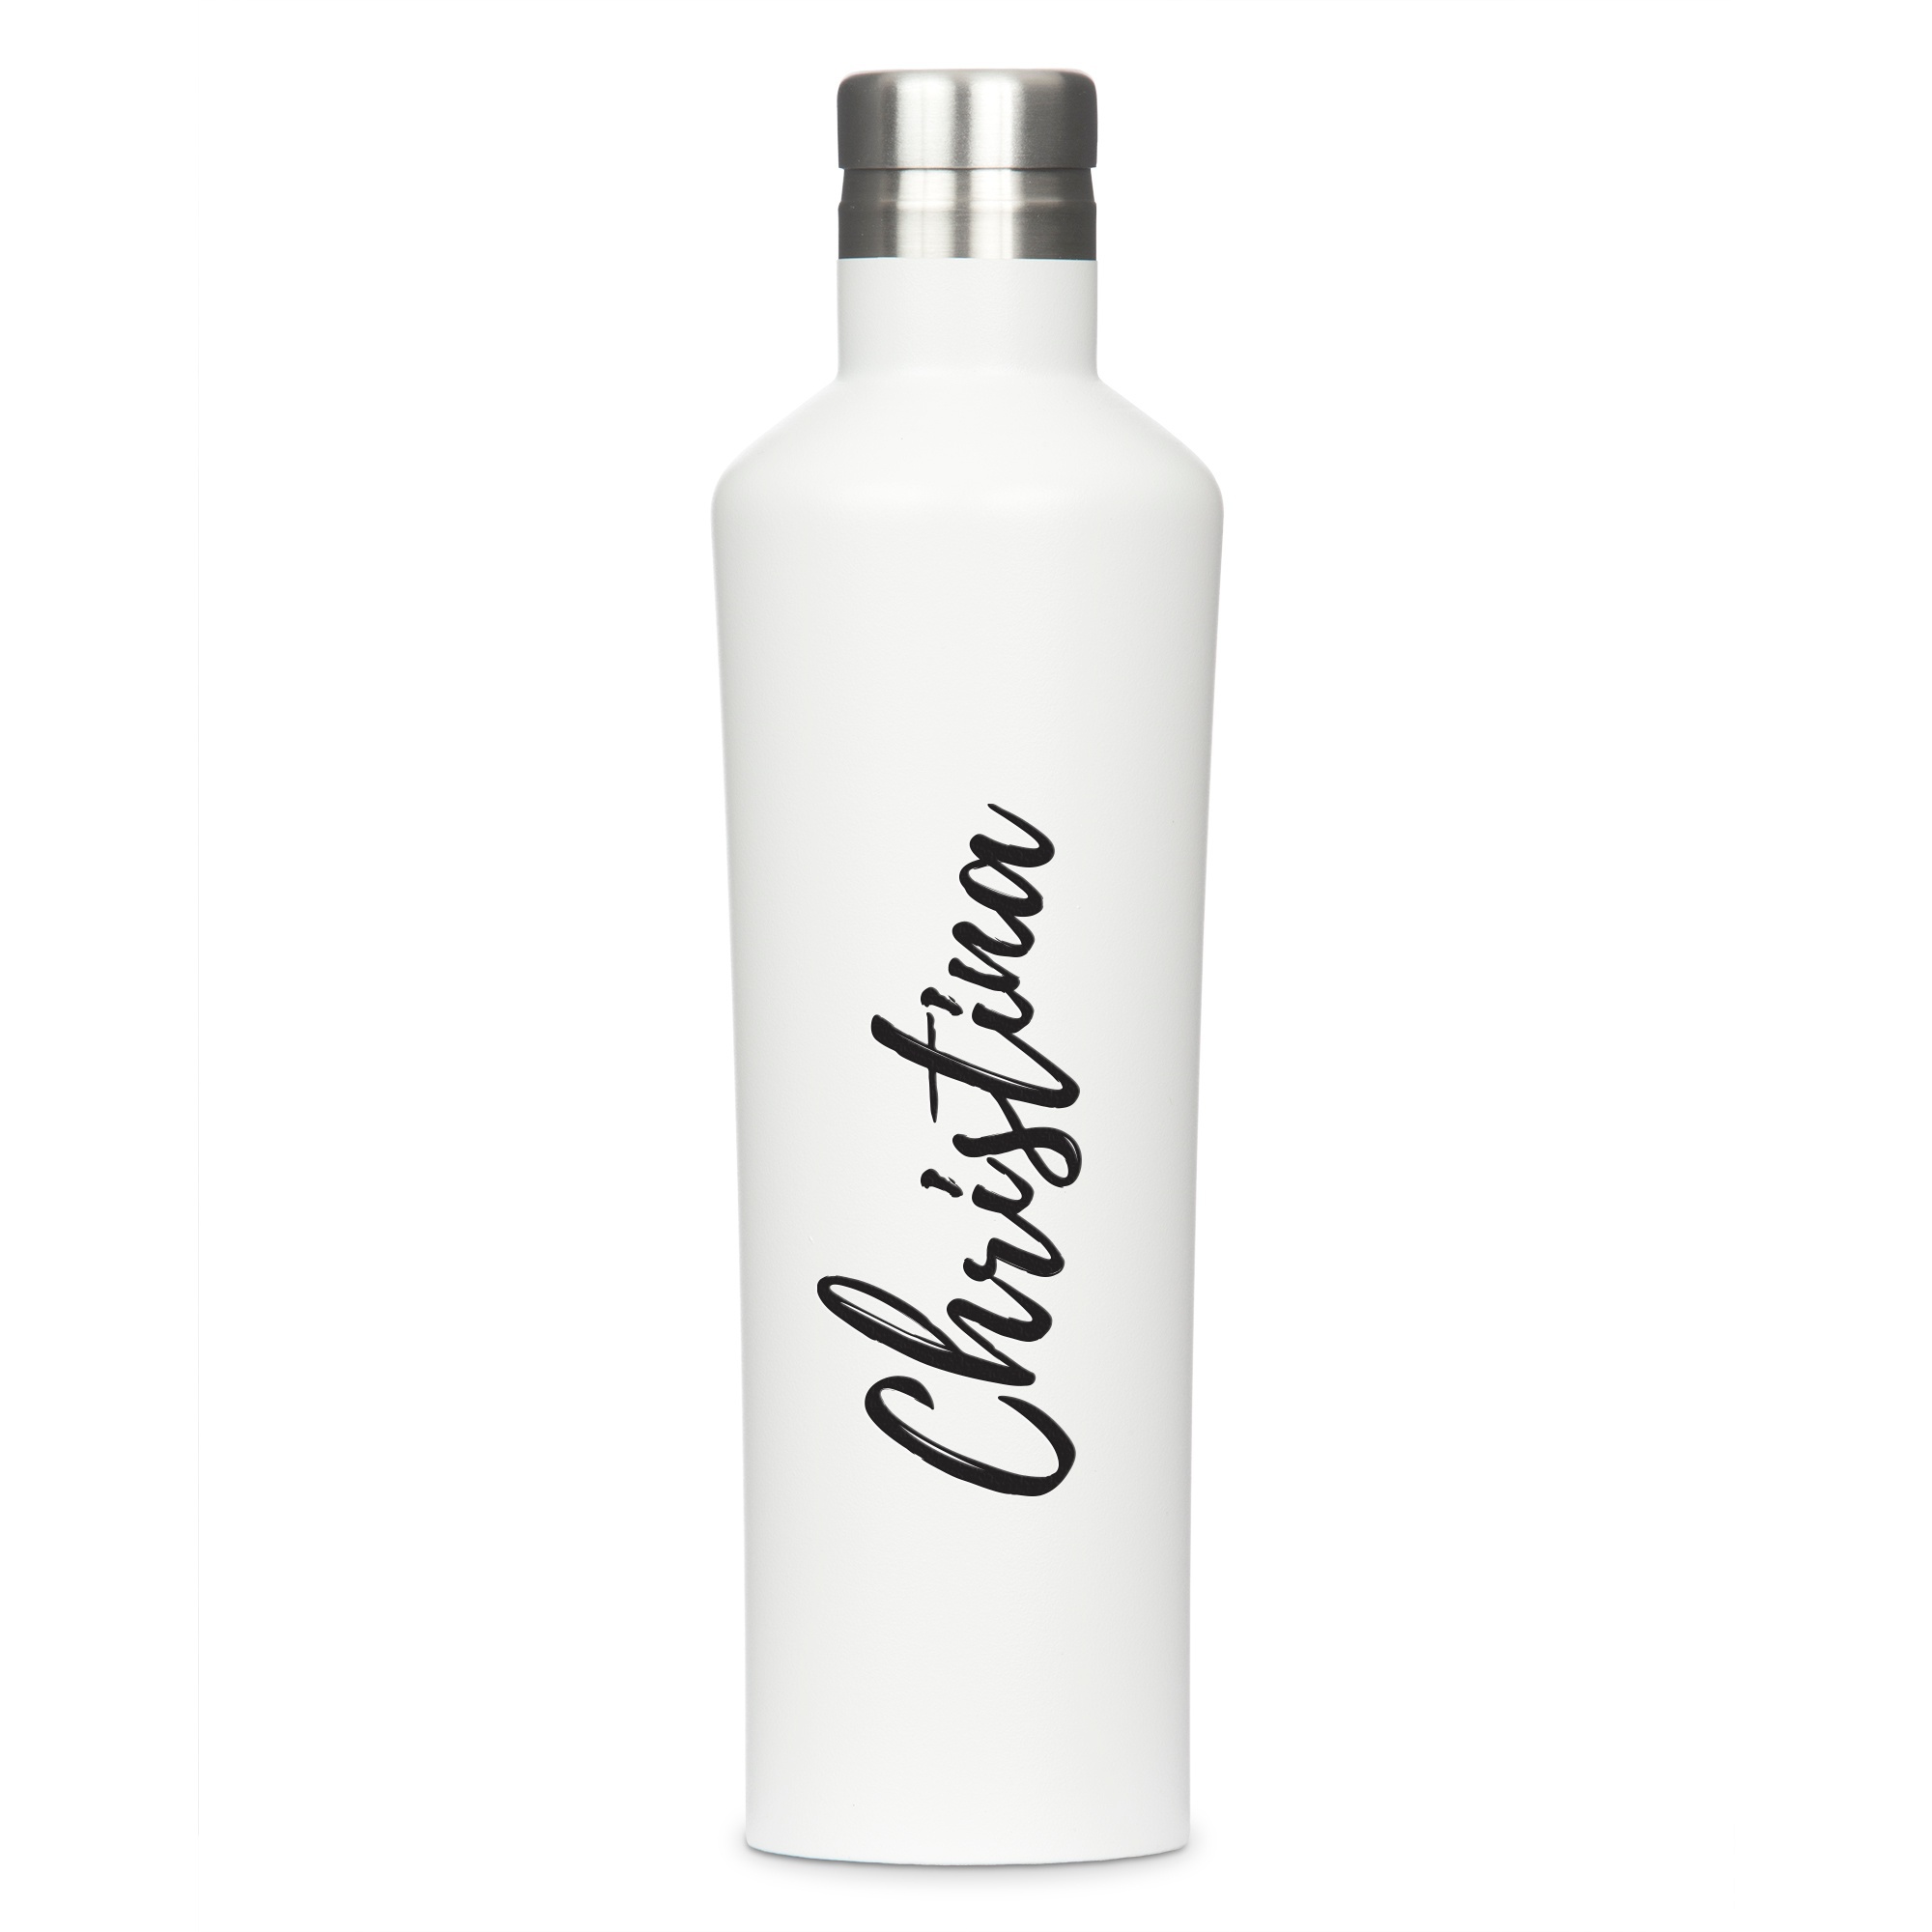 4723-p-8907-147-w_stainless-steel-water-bottle-modern-shape-calligraphy-print